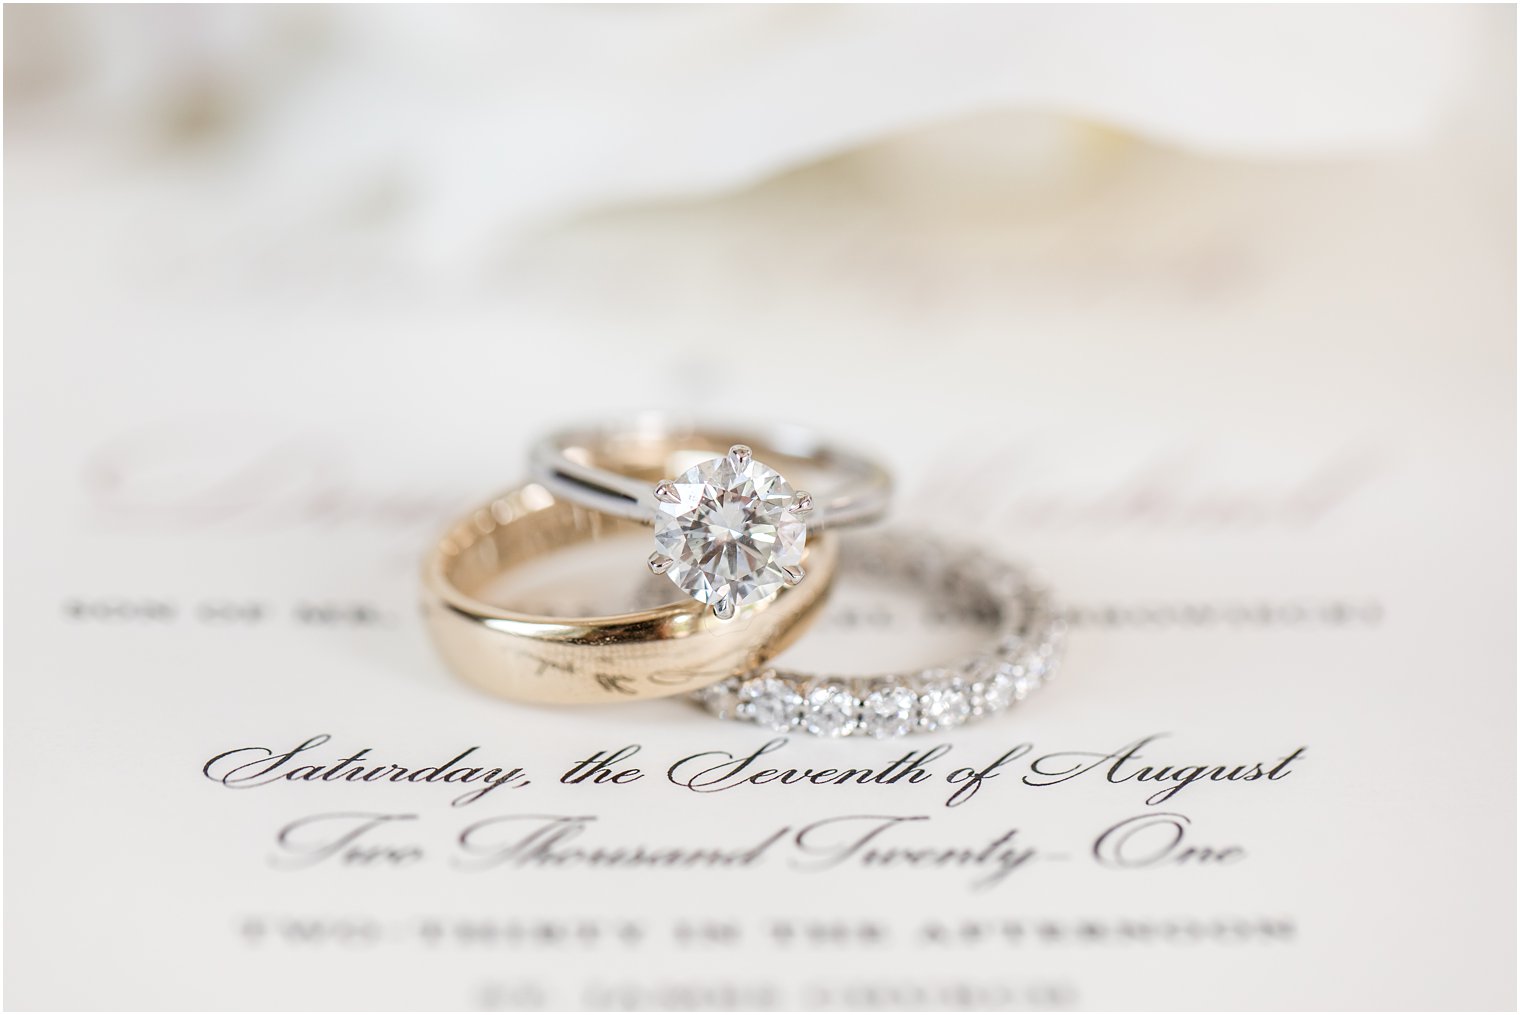 wedding bands lay on classic invitation for NJ wedding day